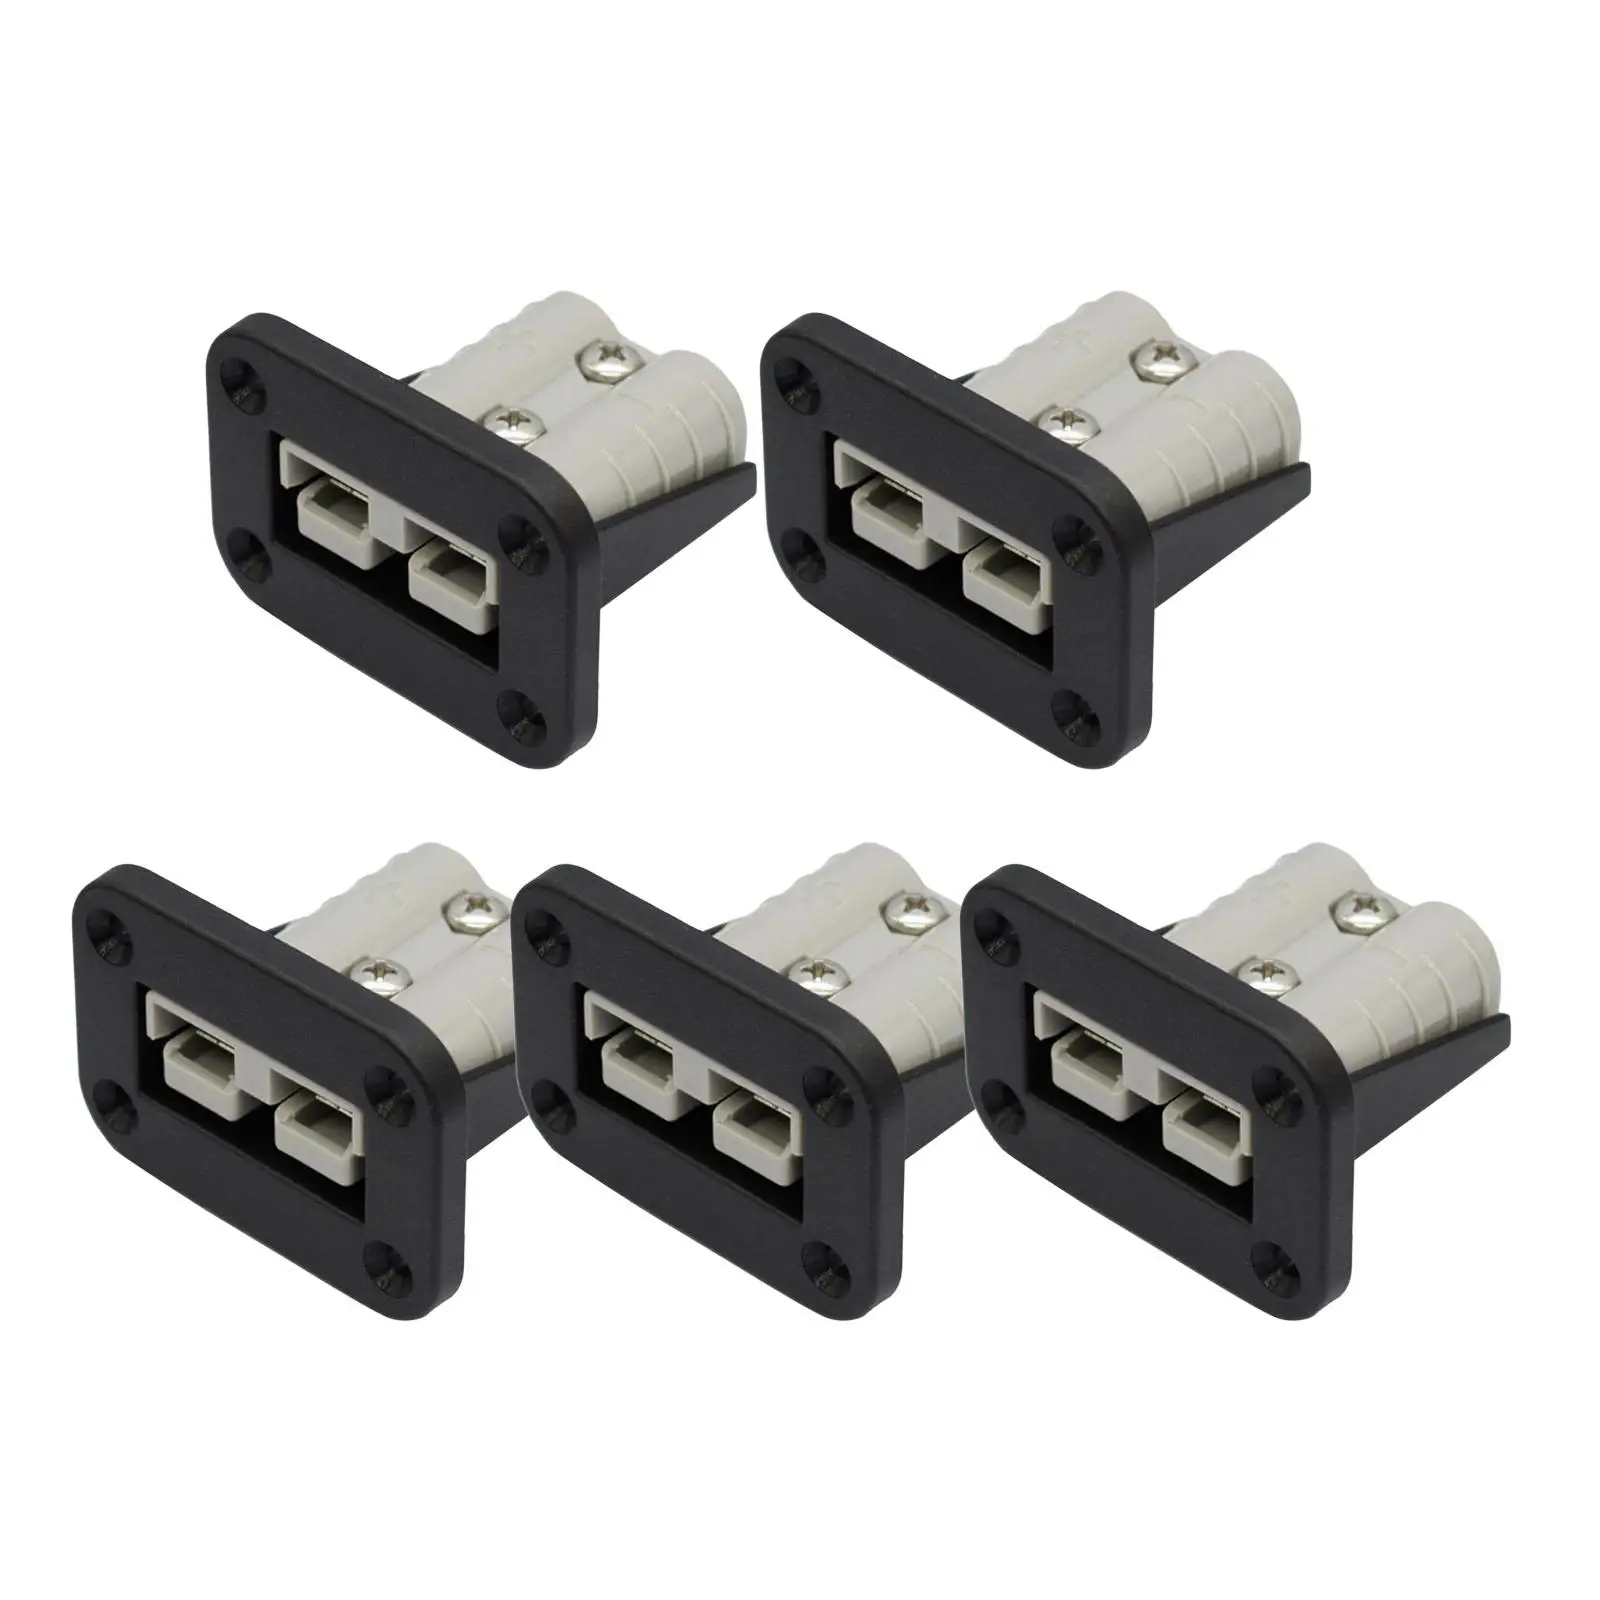 5Pcs 5 Plug Mounting Br ket Panel Cover Recessed Connector  Dual USB for  Truck Y hts Motorhomes Buses